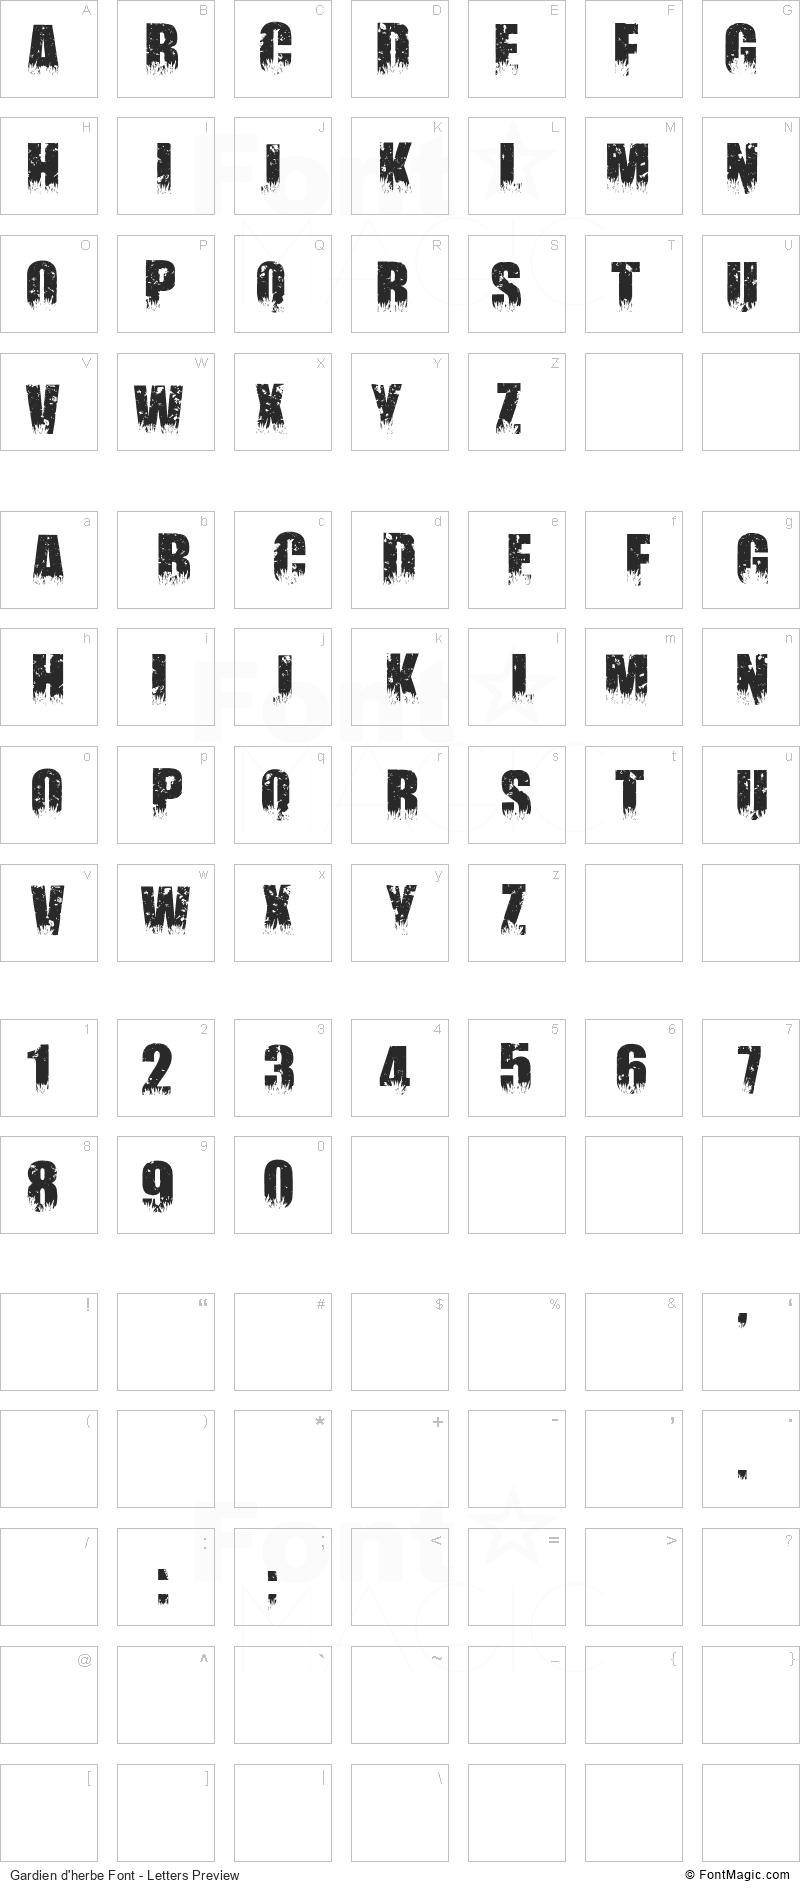 Gardien d’herbe Font - All Latters Preview Chart